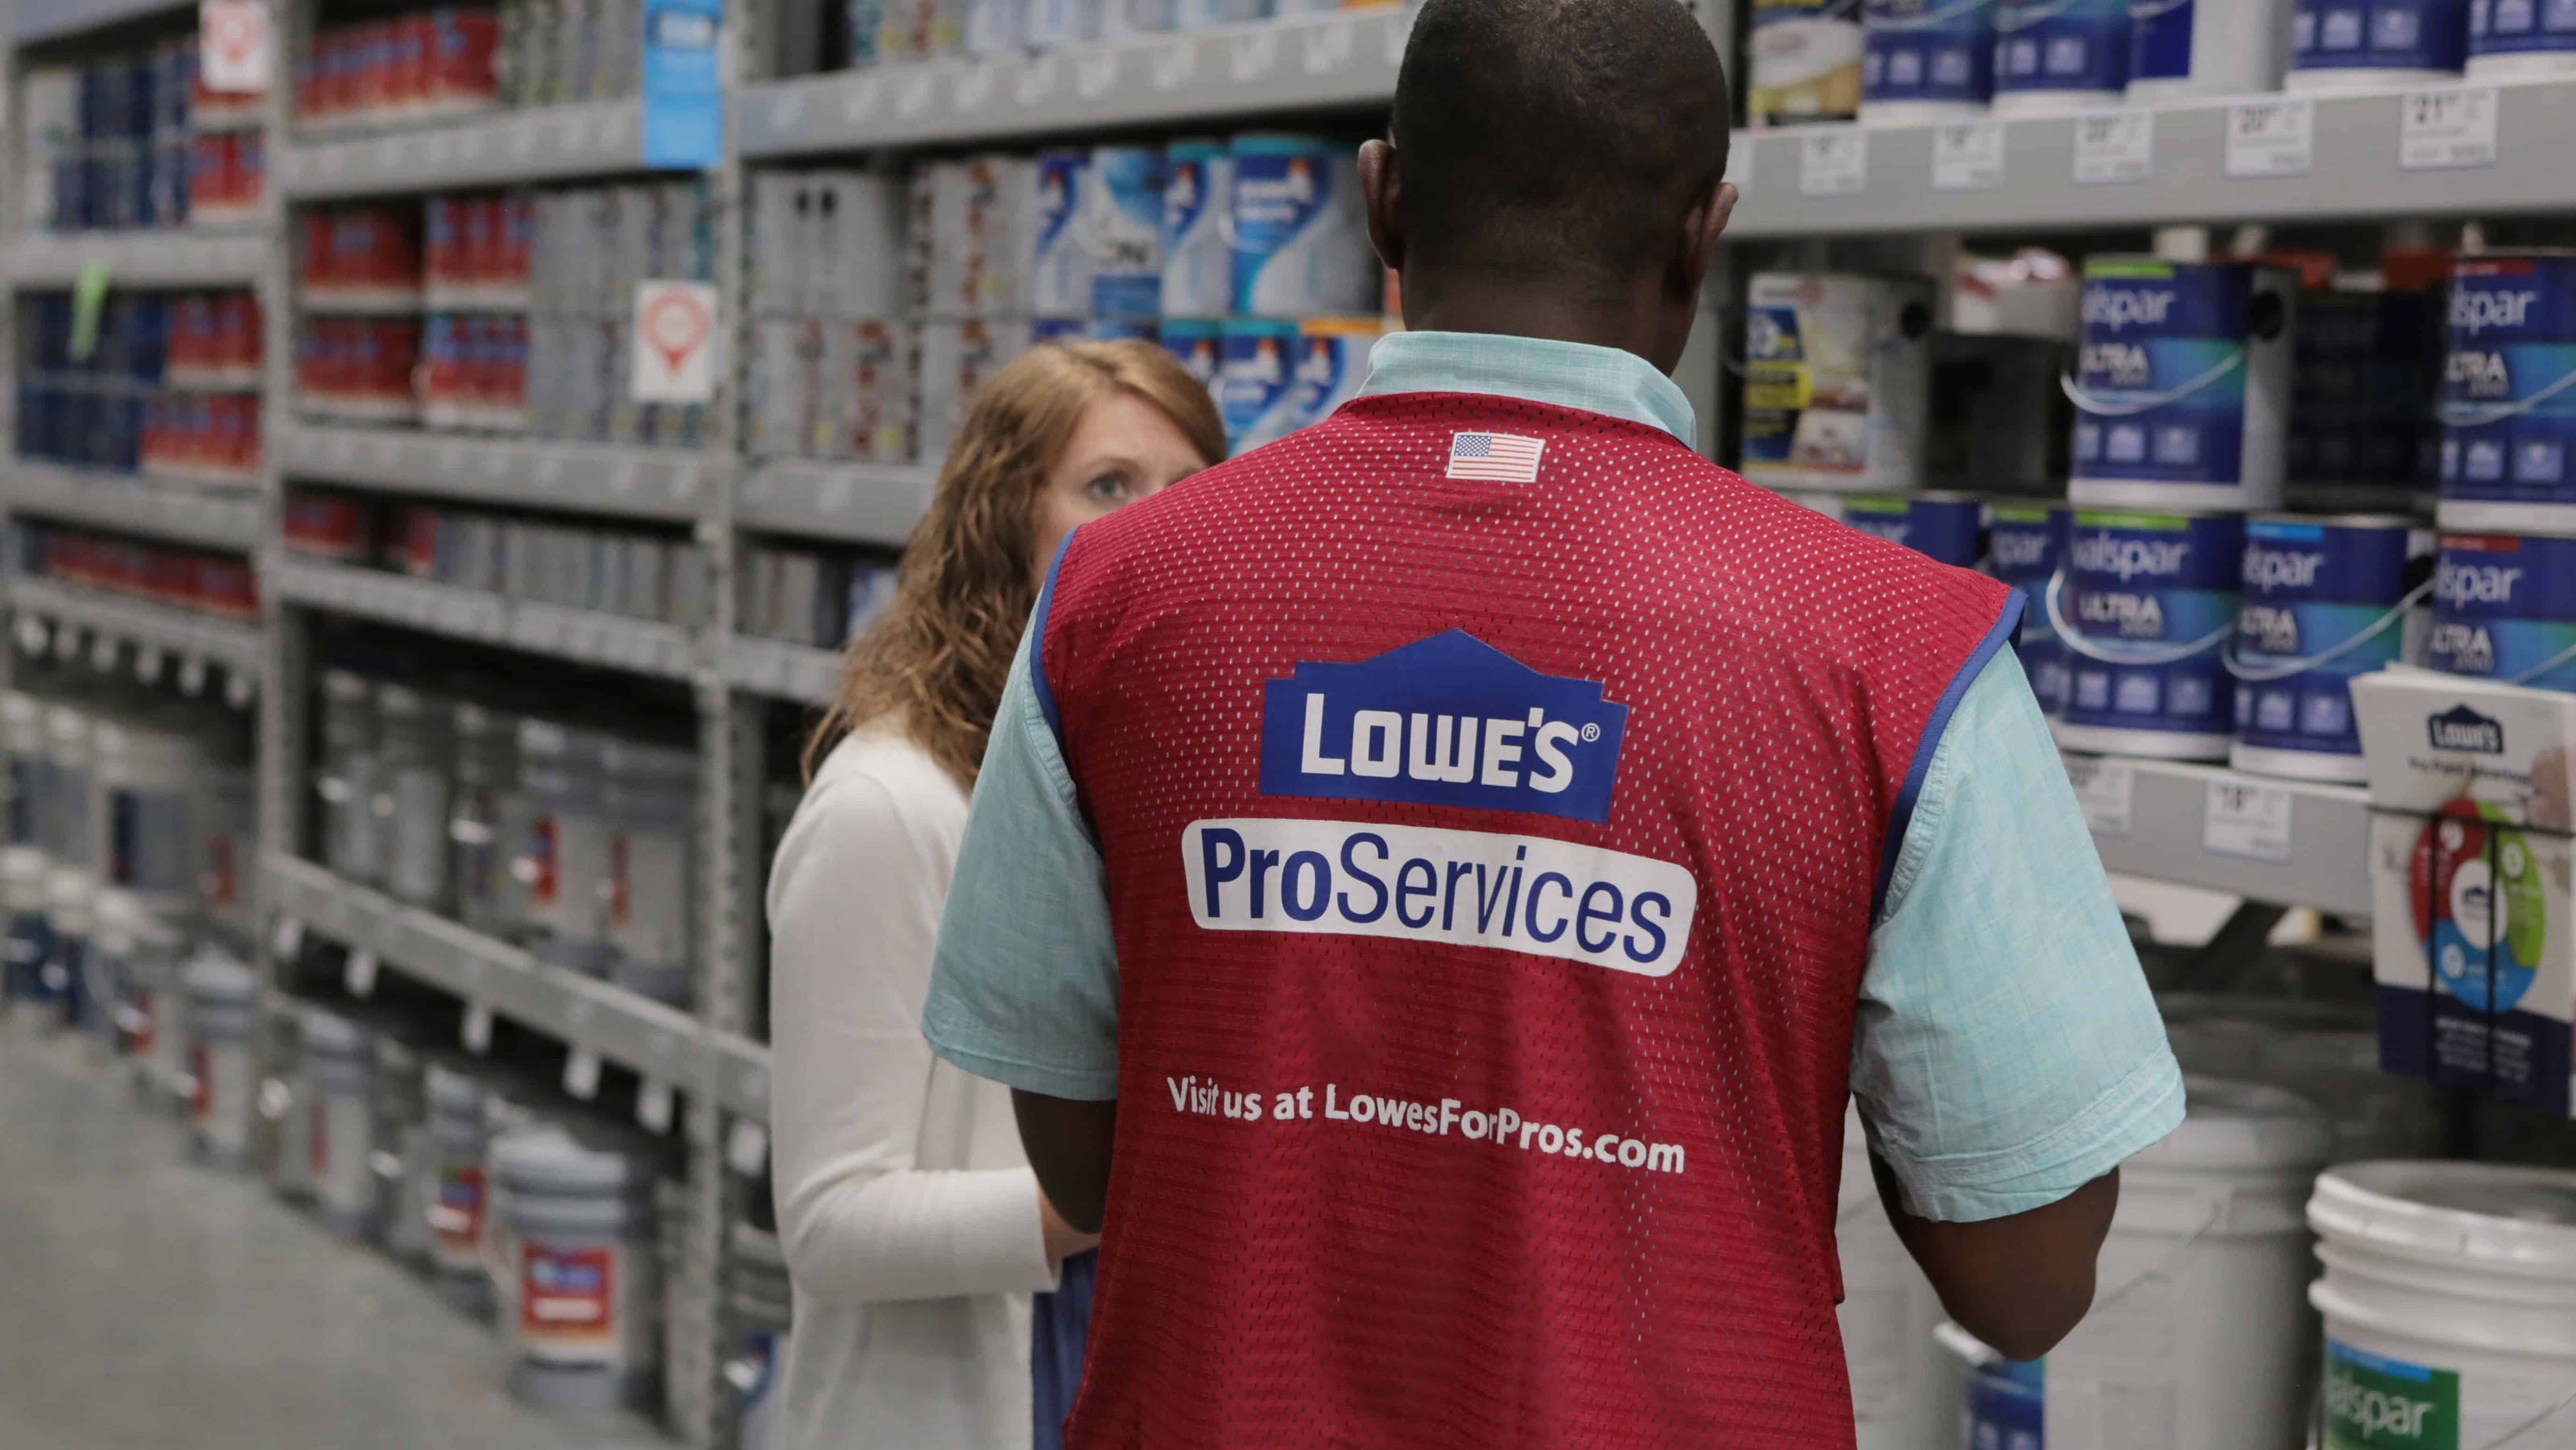 Lowe's to give another 100M in bonuses to employees